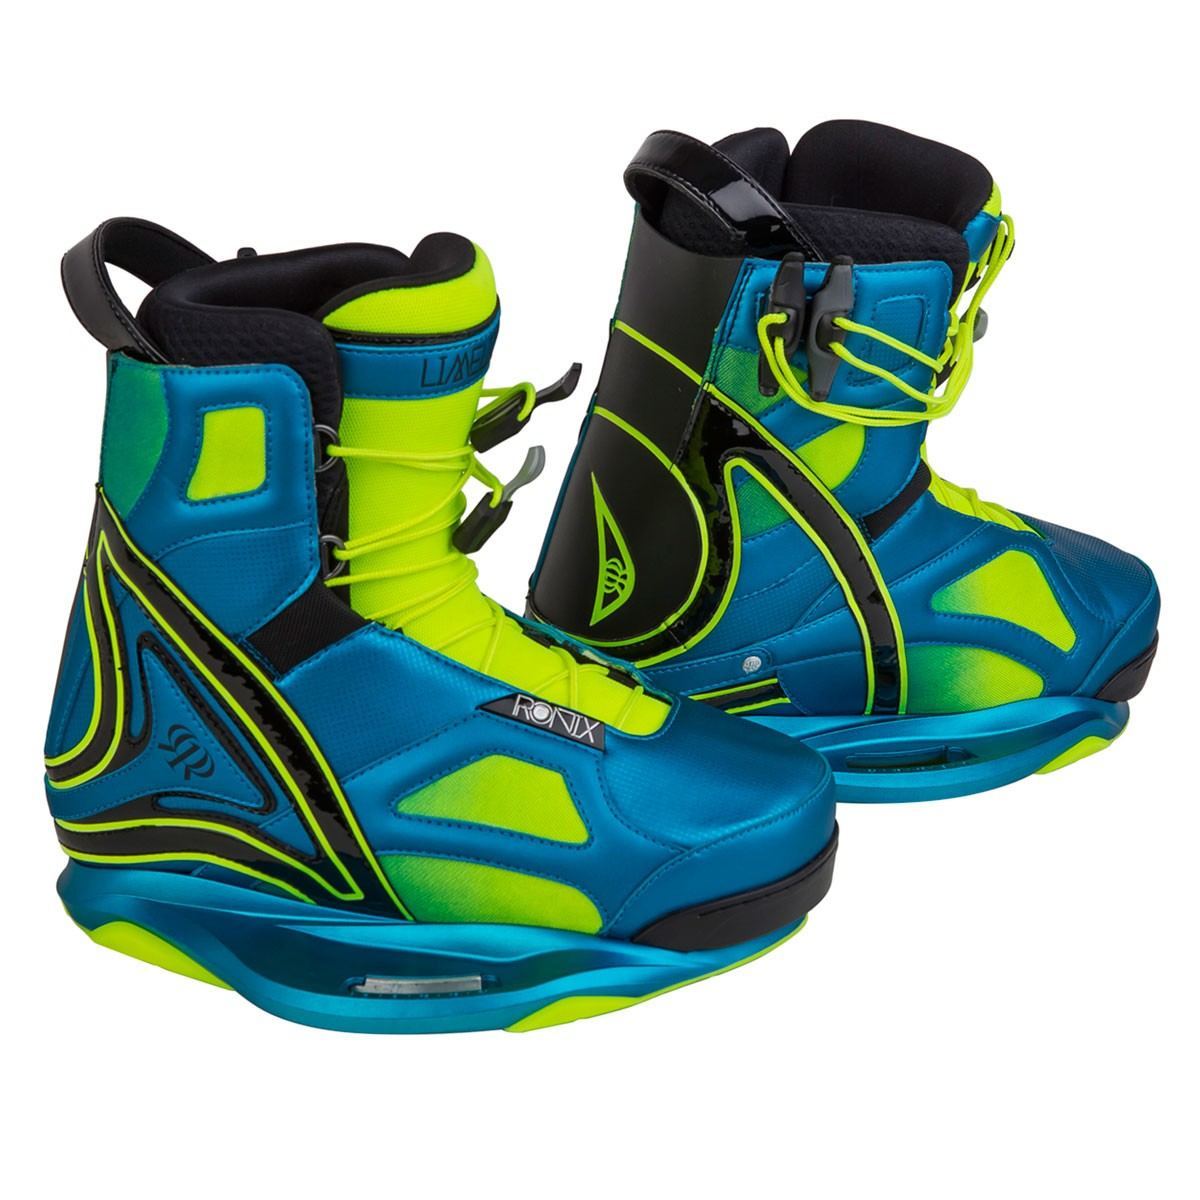 2015-ronix-boots-limelight-02